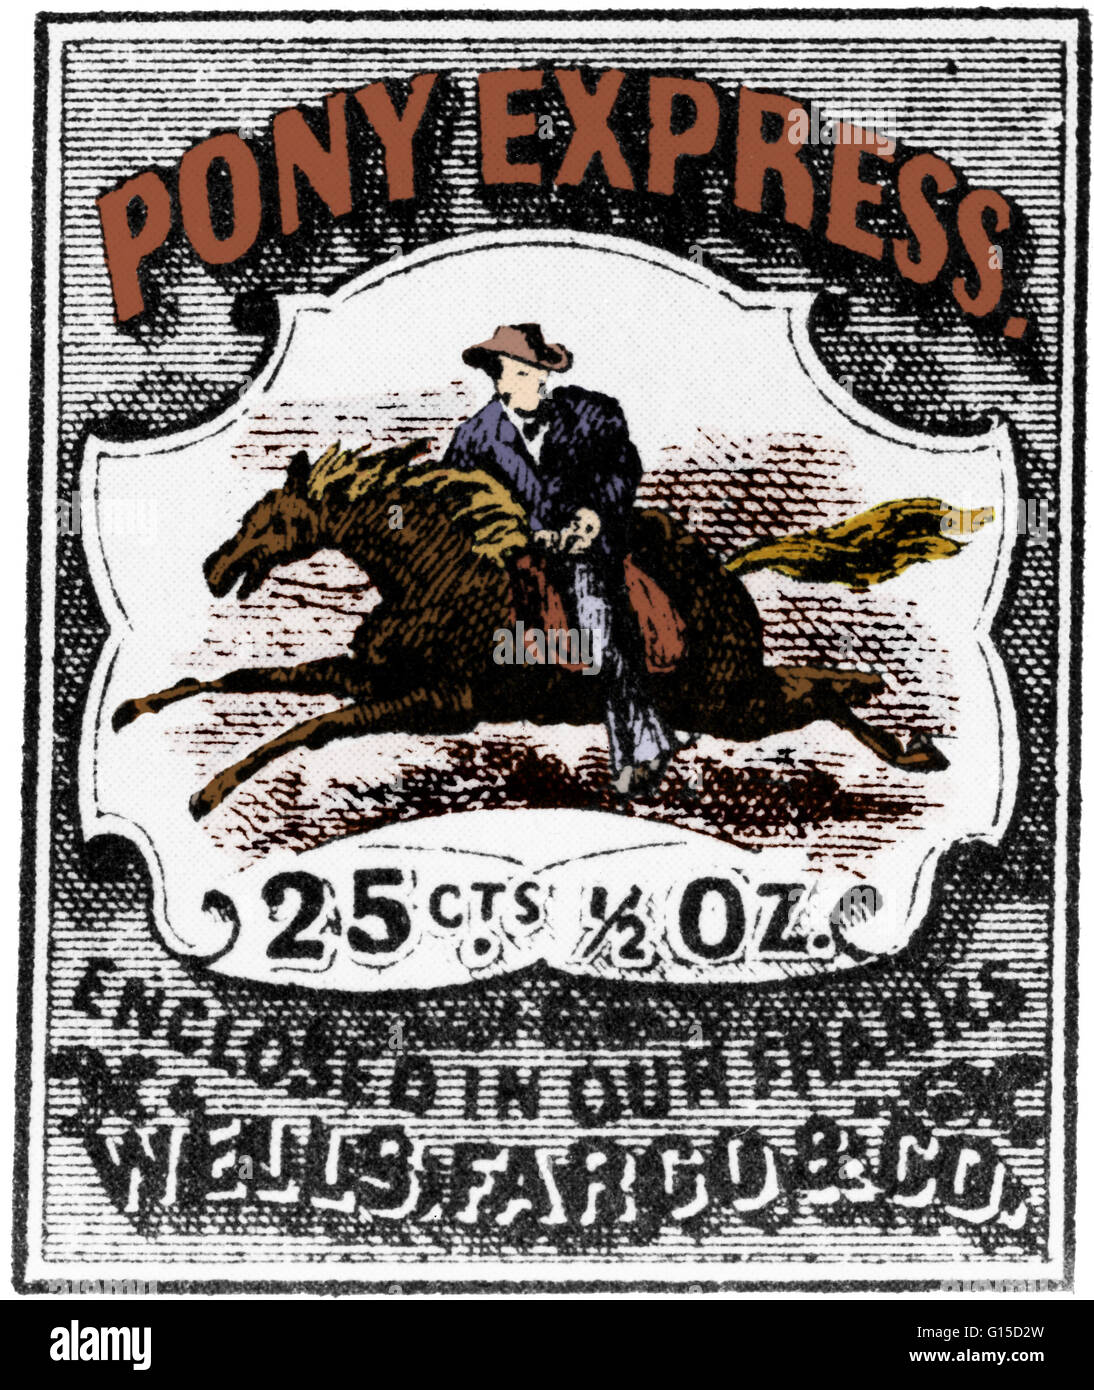 An April 1860 Pony Express mail delivery stamp. Stock Photo